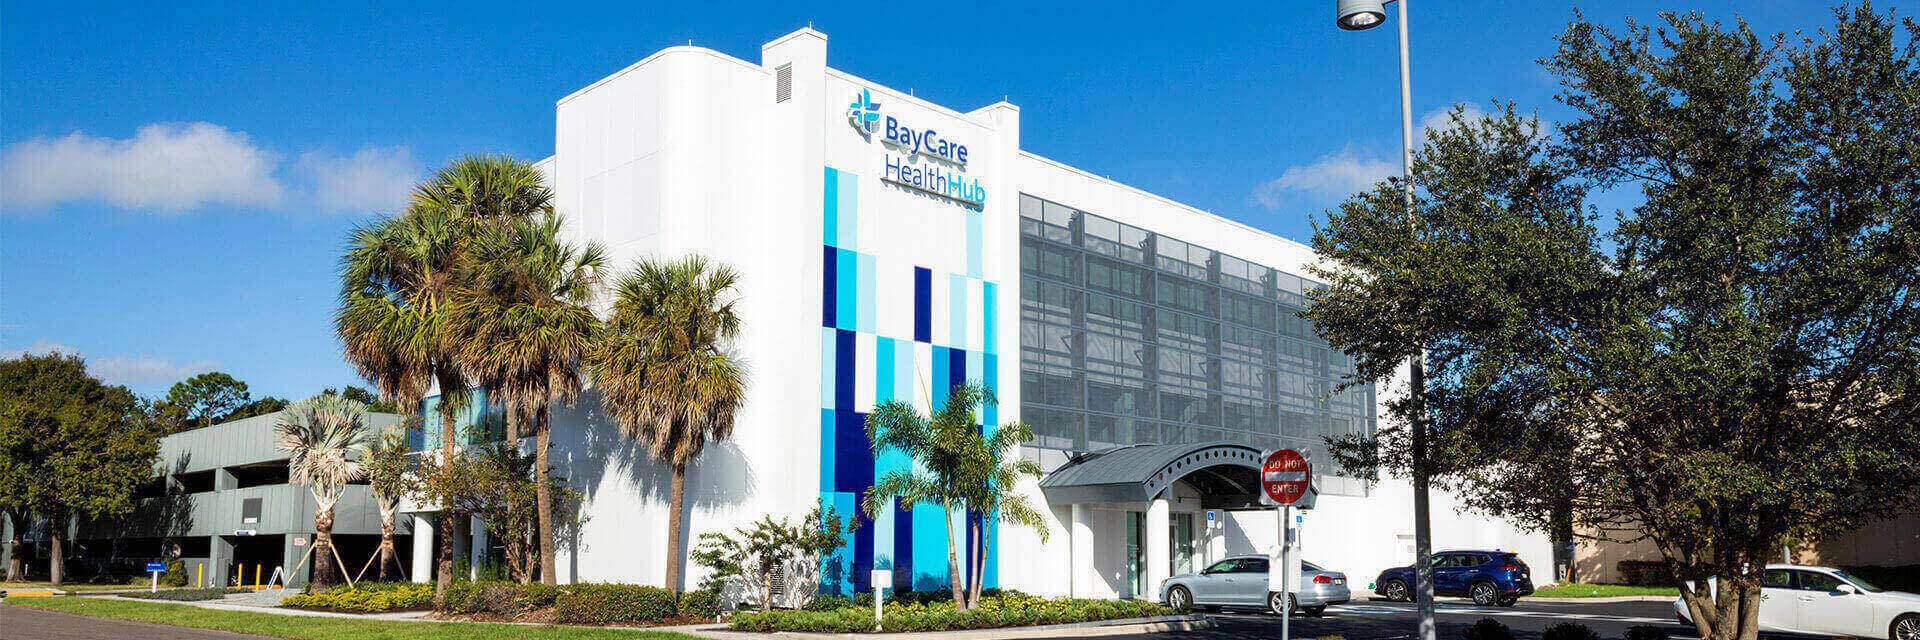 Exterior of BayCare HealthHub (South Tampa)